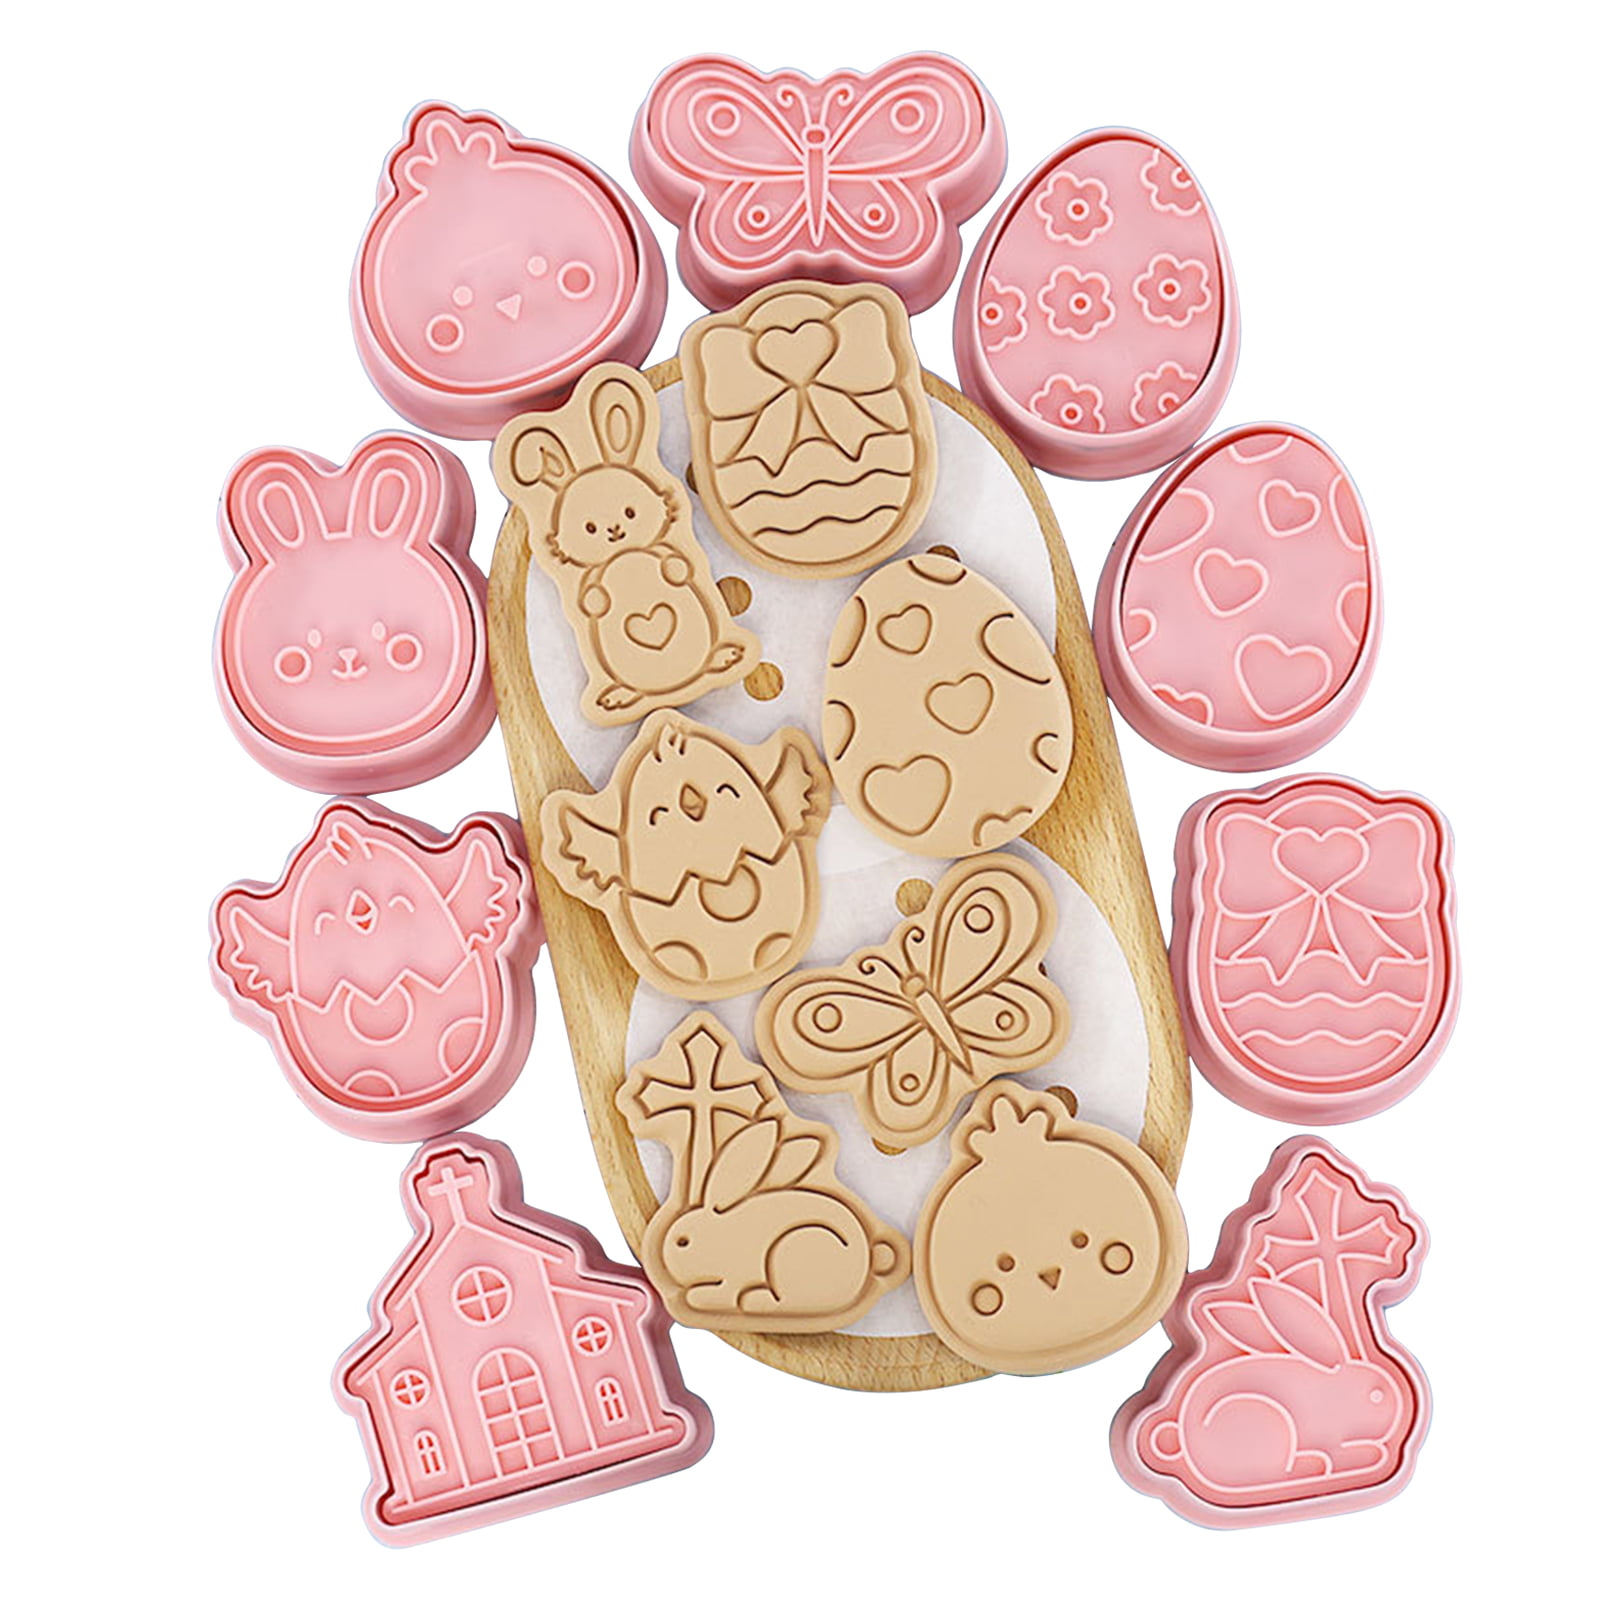 4 x Kids Metal Cookie Cutters Set Rabbit Chick Egg Bunny Biscuit Fondant Cake 